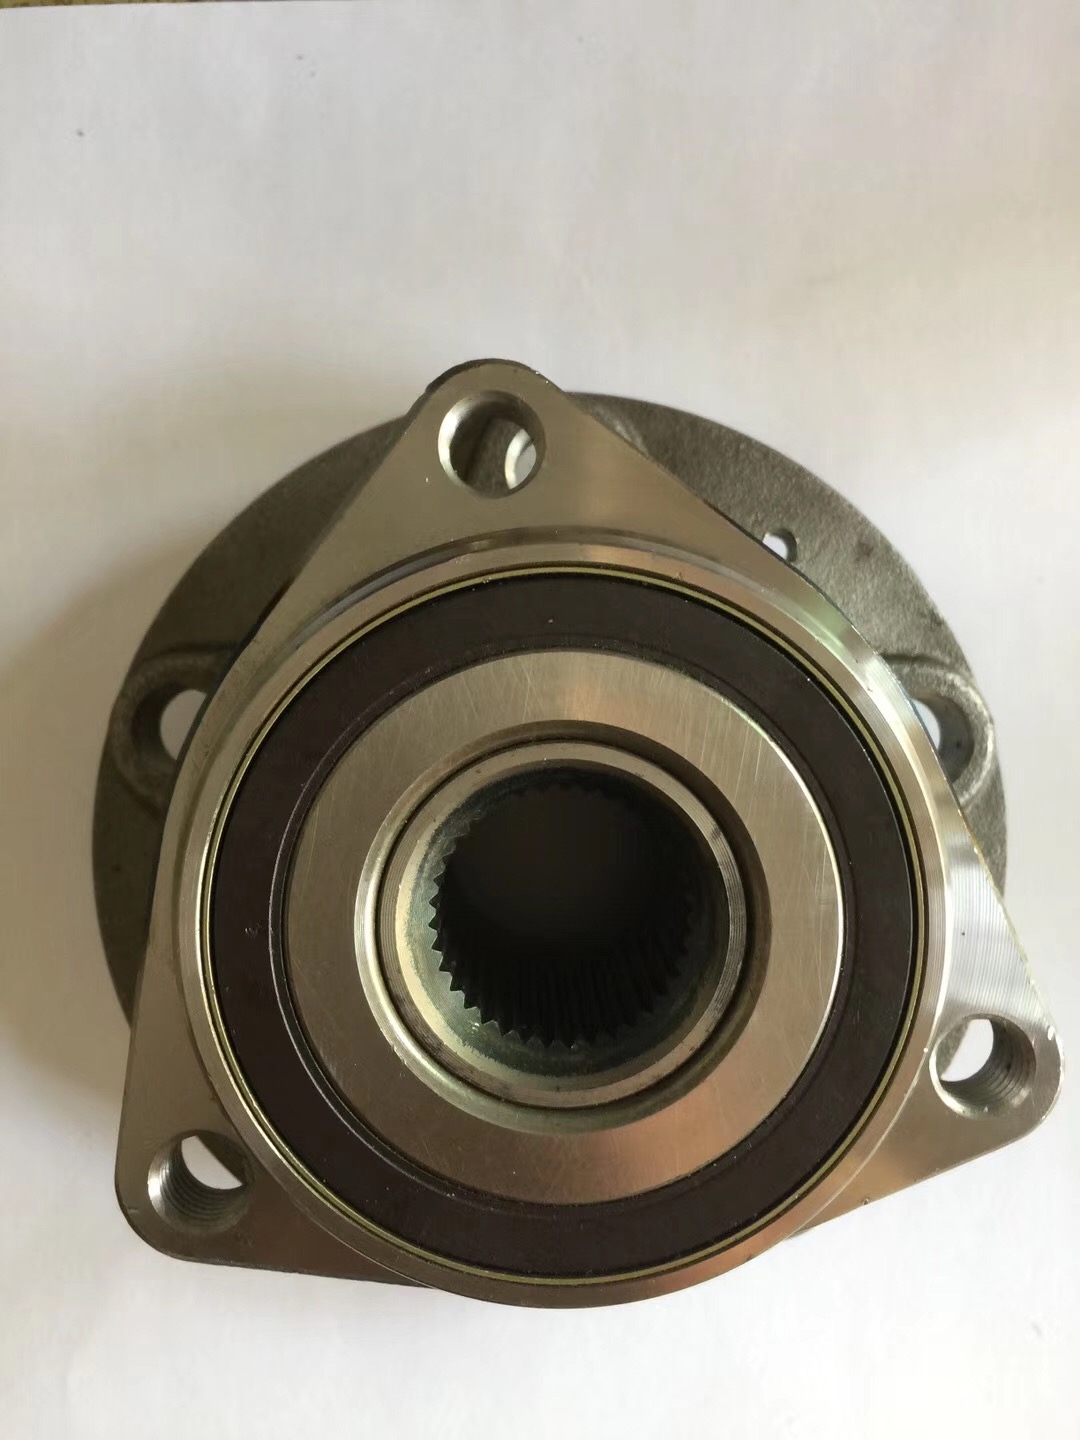 GCR15 Agricultural Machinery Bearing GW210PP9 For Motor Spindle High Temp Resistance